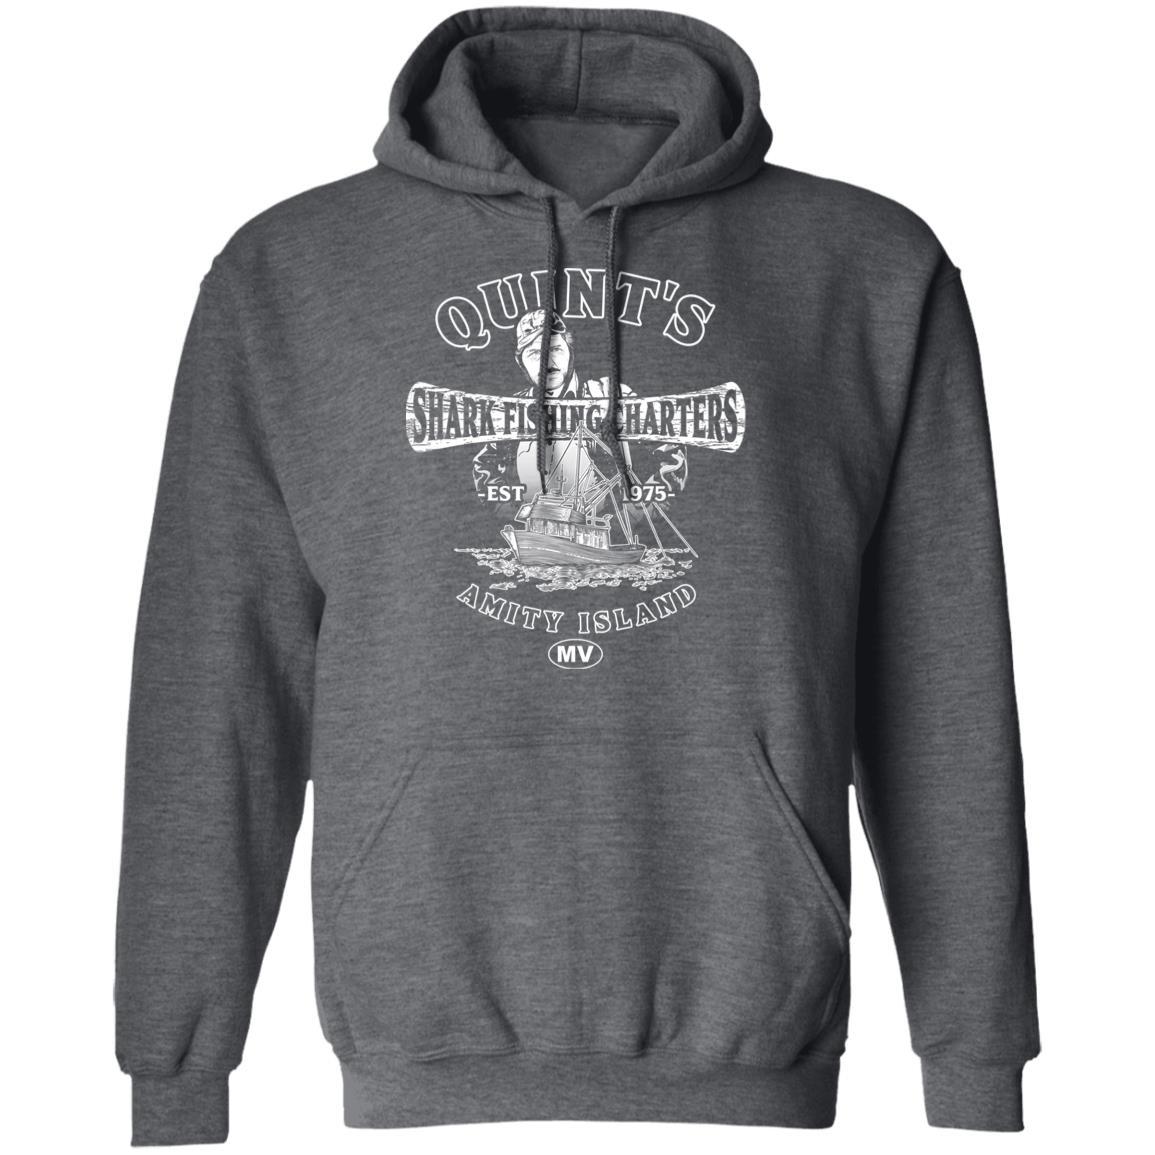 Quint's Hoodie – The Dude's Threads